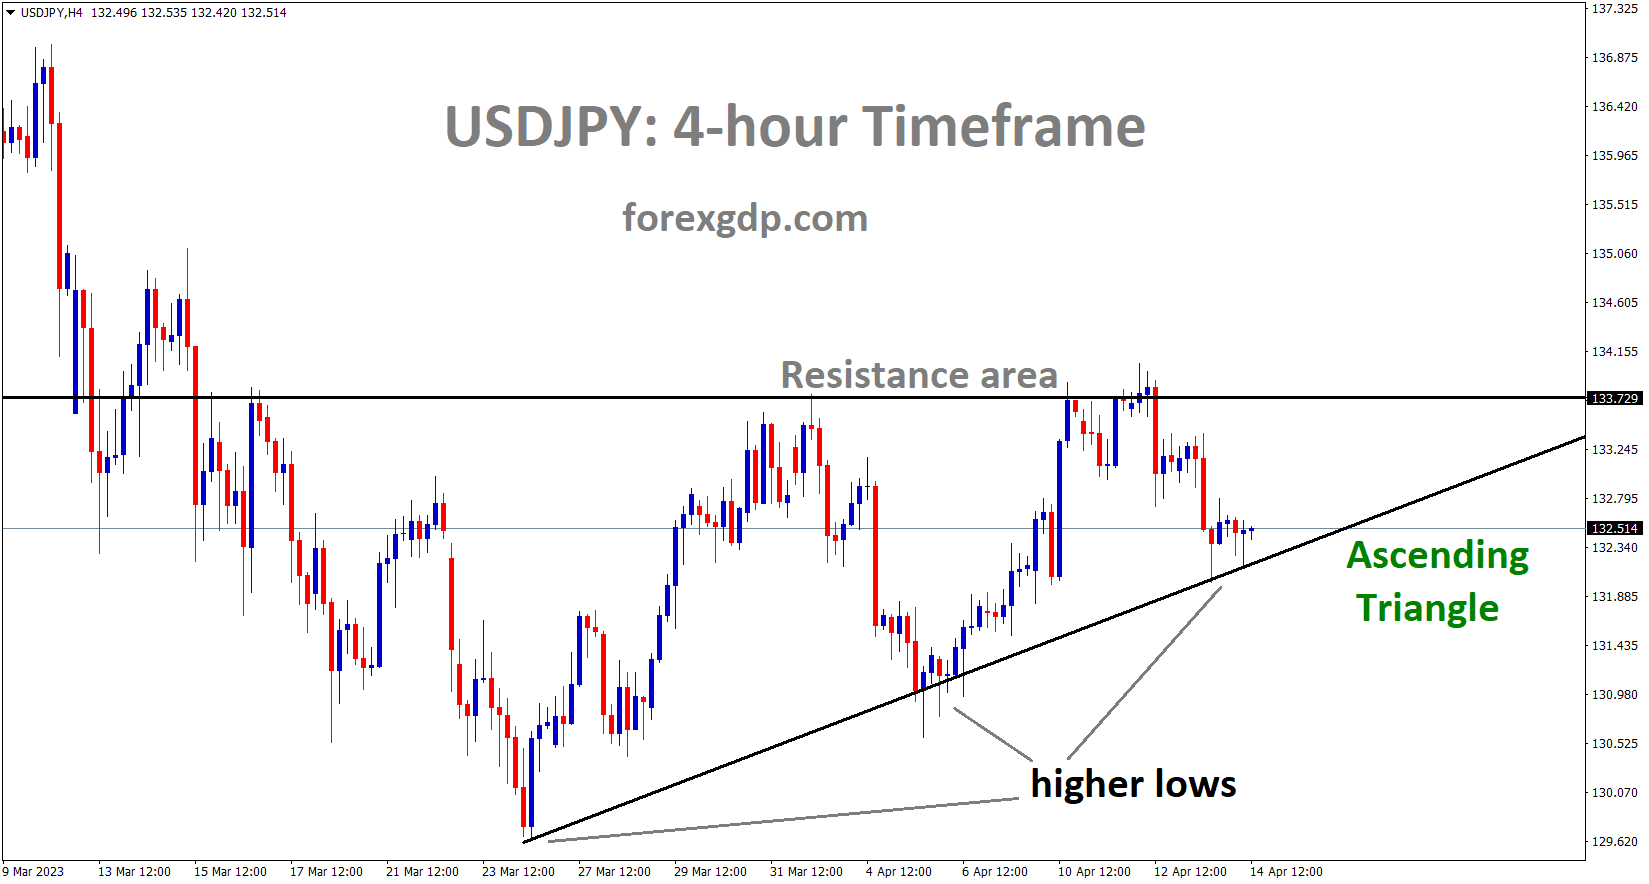 USDJPY is moving in an Ascending triangle pattern and the market has reached the higher low area of the pattern